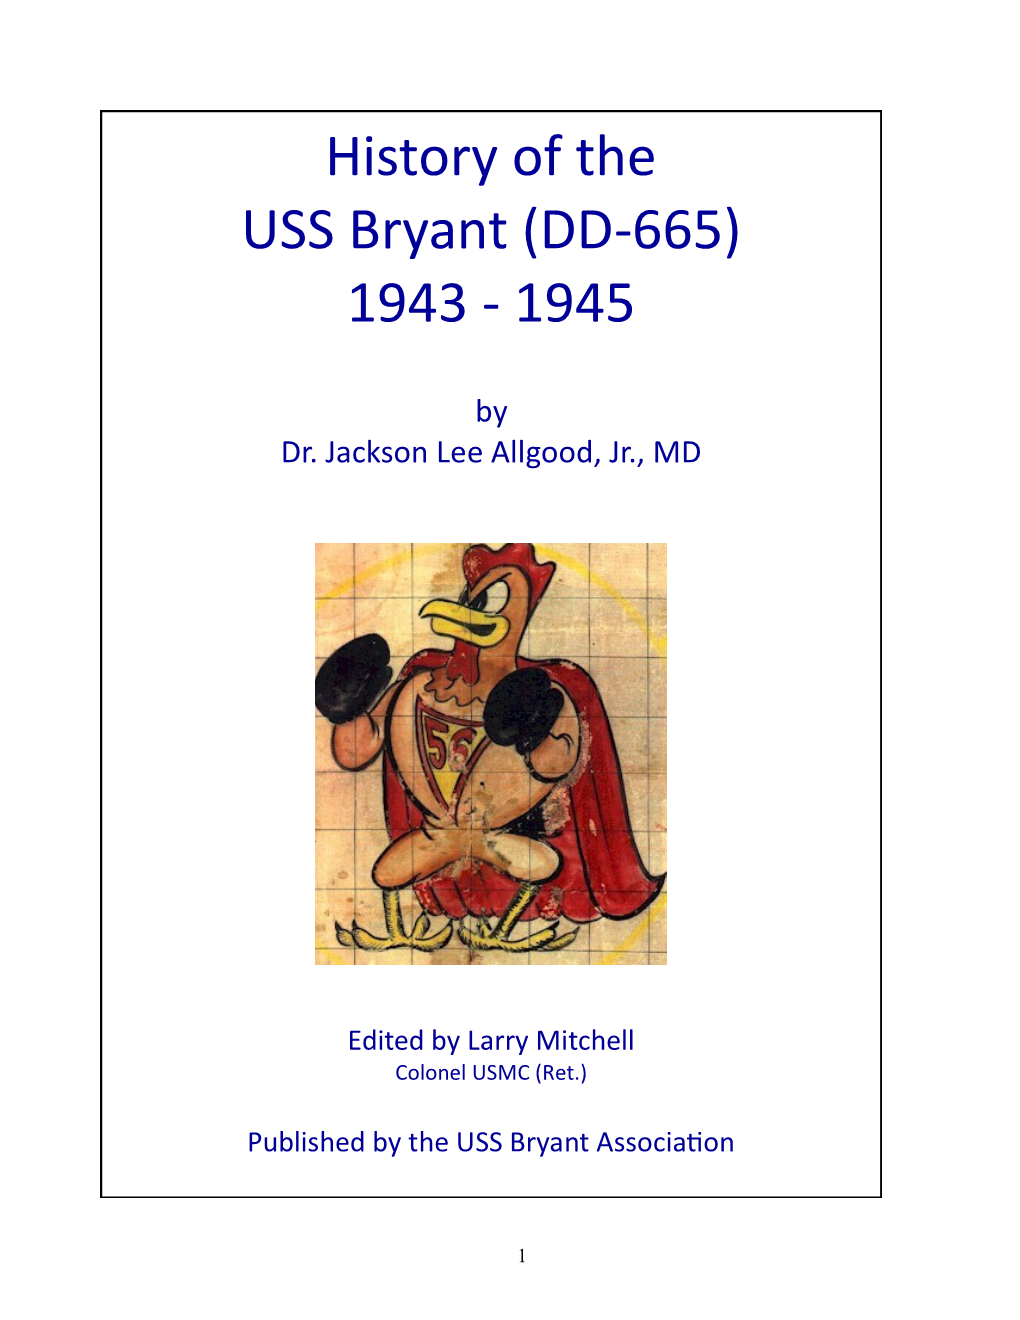 History of the USS Bryant (DD-665) 1943 - 1945